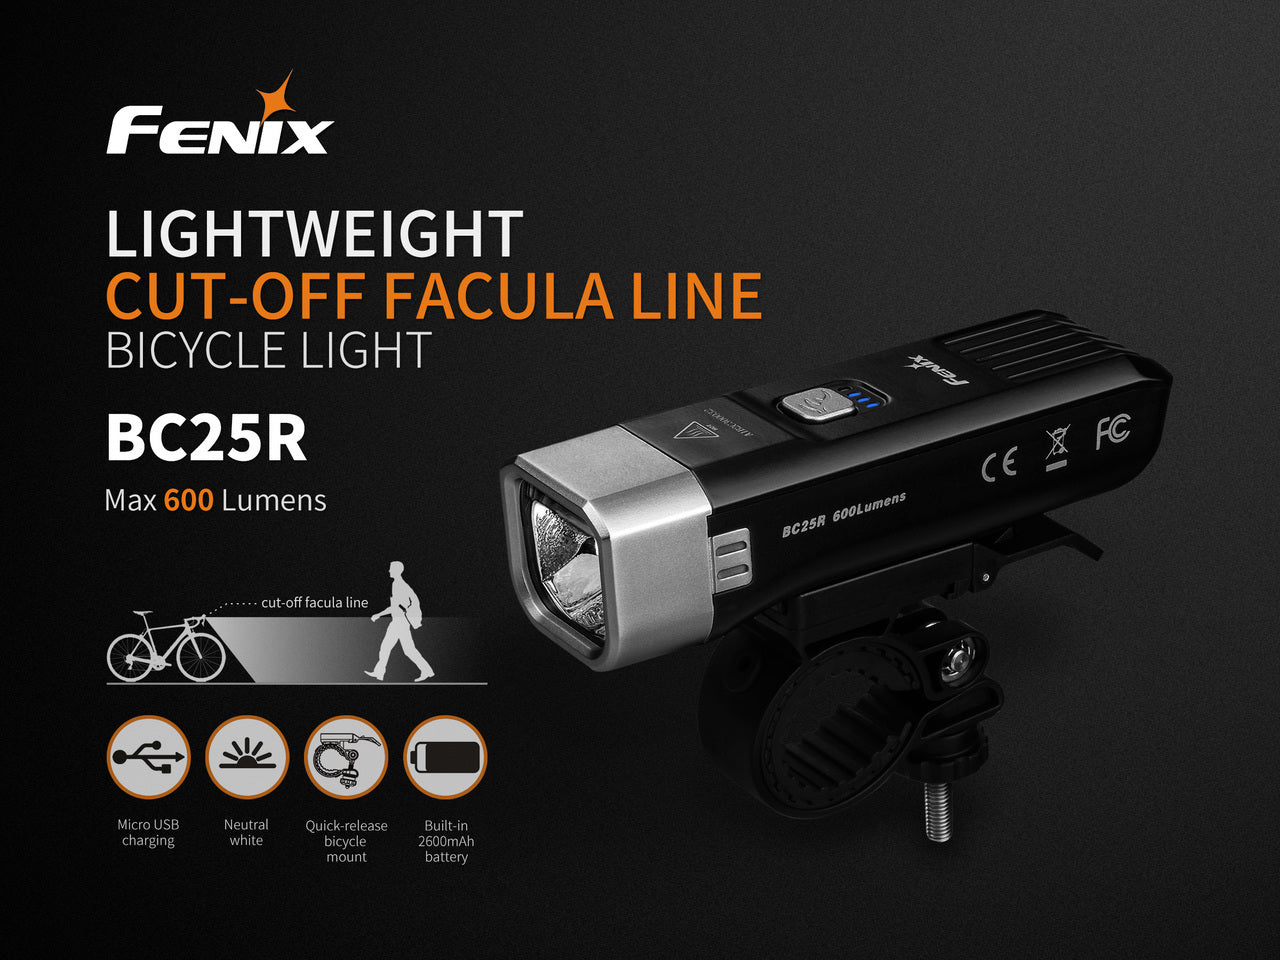 Fenix BC25R LED Bike Light, 600 Lumens USB Rechargeable Bicycle Light, Neutral White LED Light, Compact yet Powerful Light for Bike Trails and Races in India